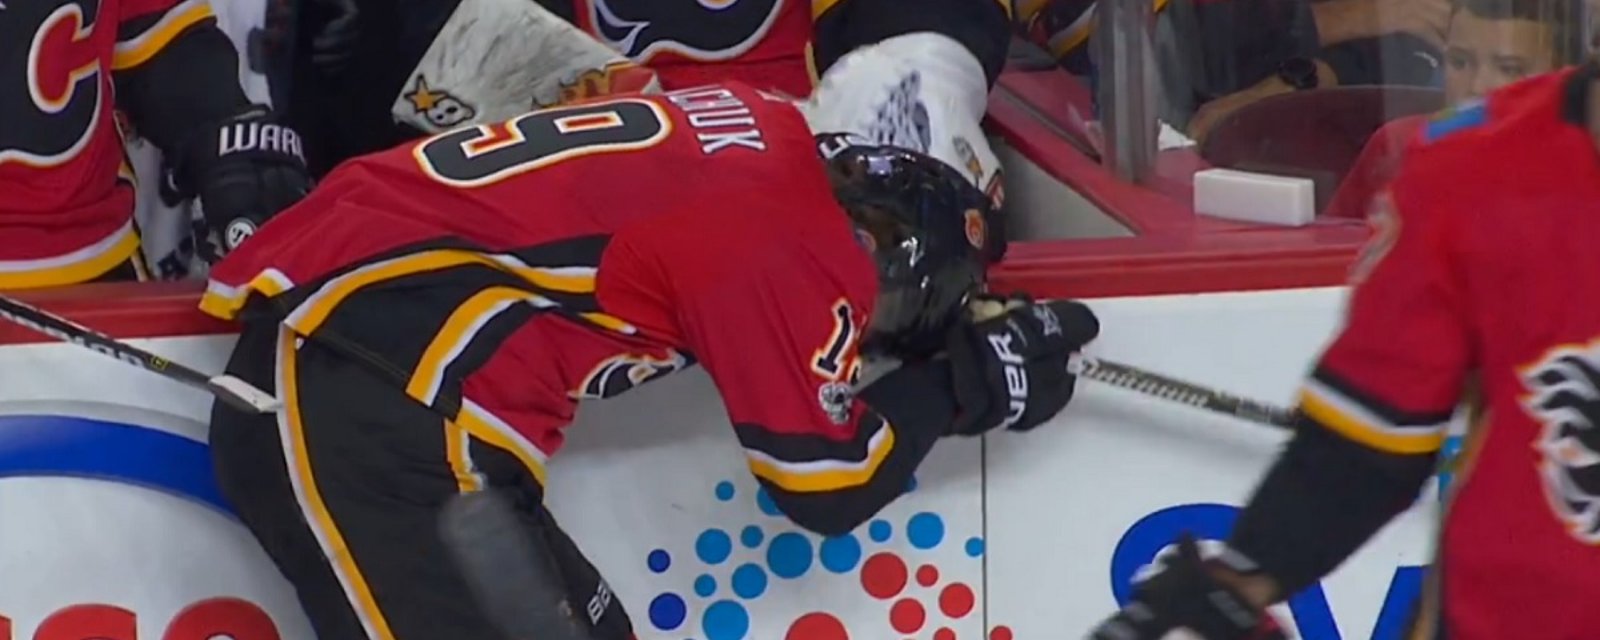  Flames star Matthew Tkachuk injured after being crushed in front of his own bench.